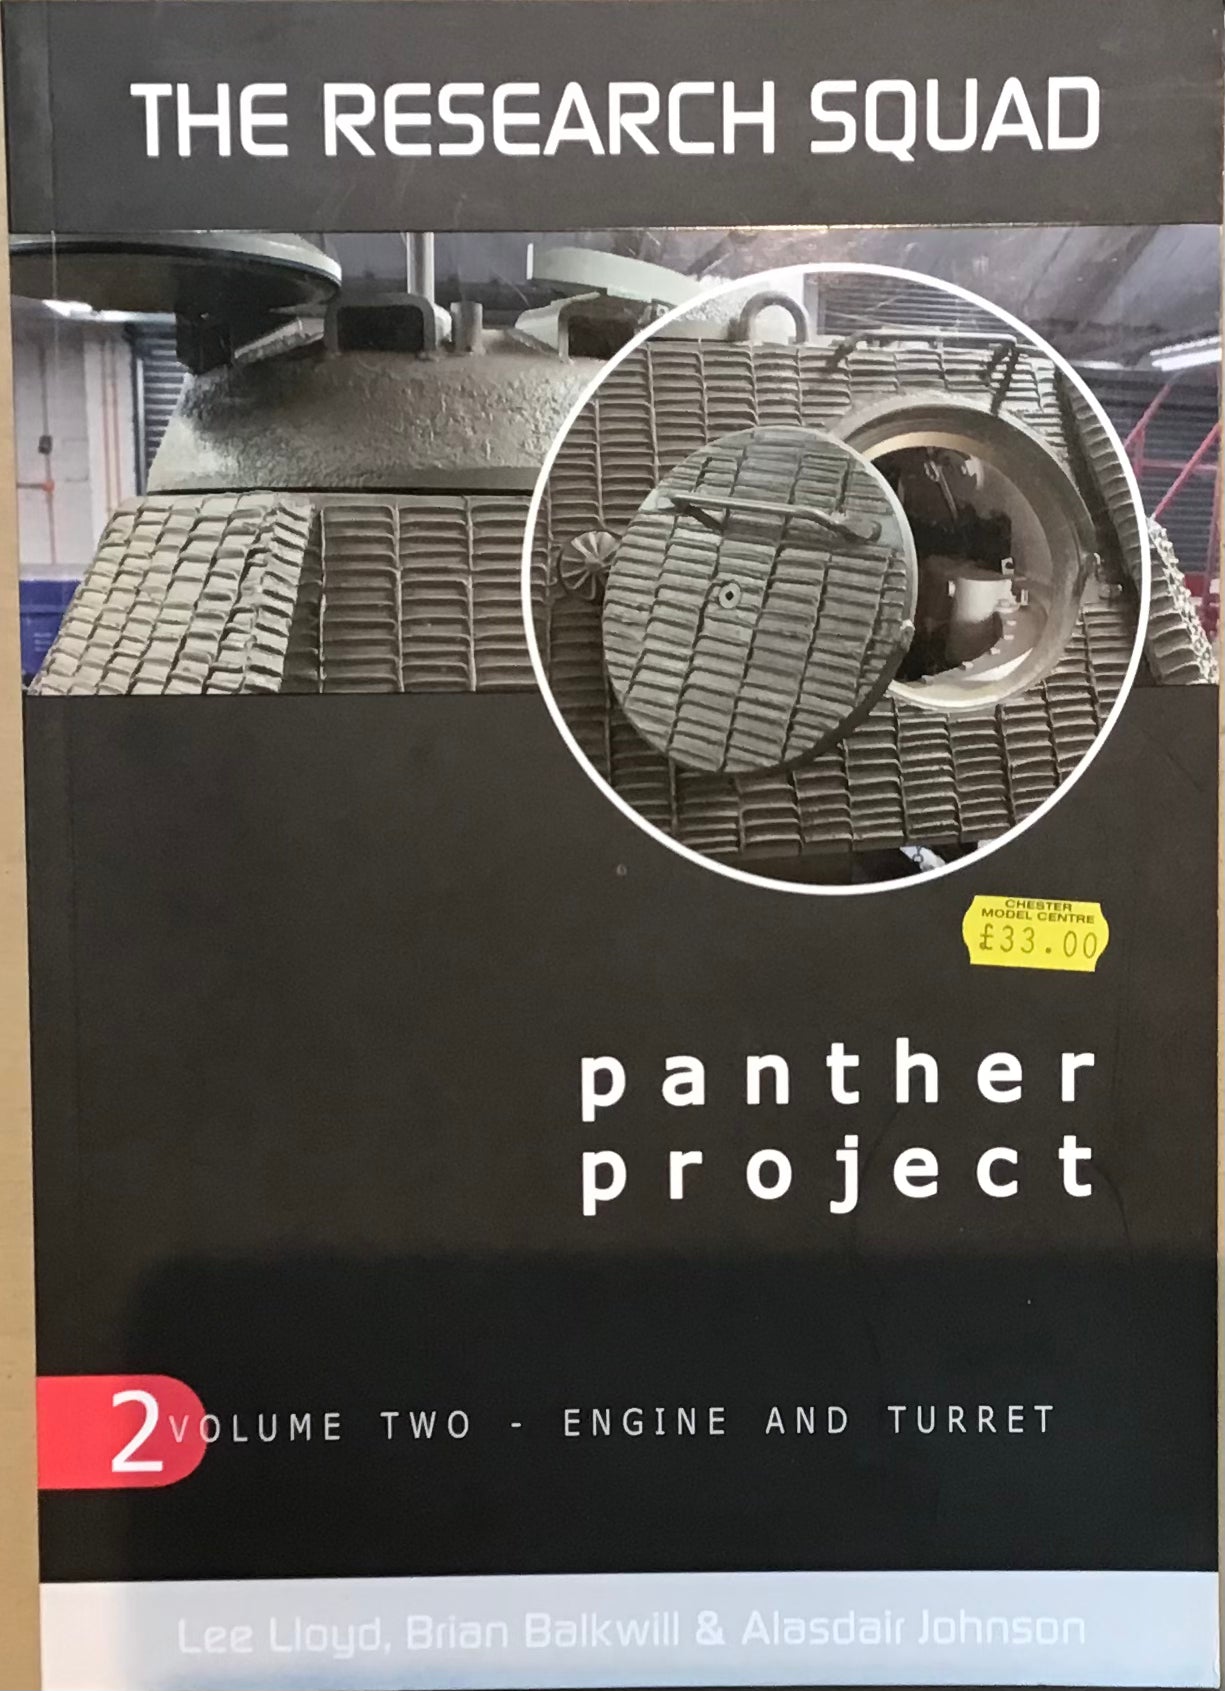 The Research Squad Panther Project Volume 2: Engine and Turret by Lee Lloyd, Brian Balkwill & Alasdair Johnson - Chester Model Centre